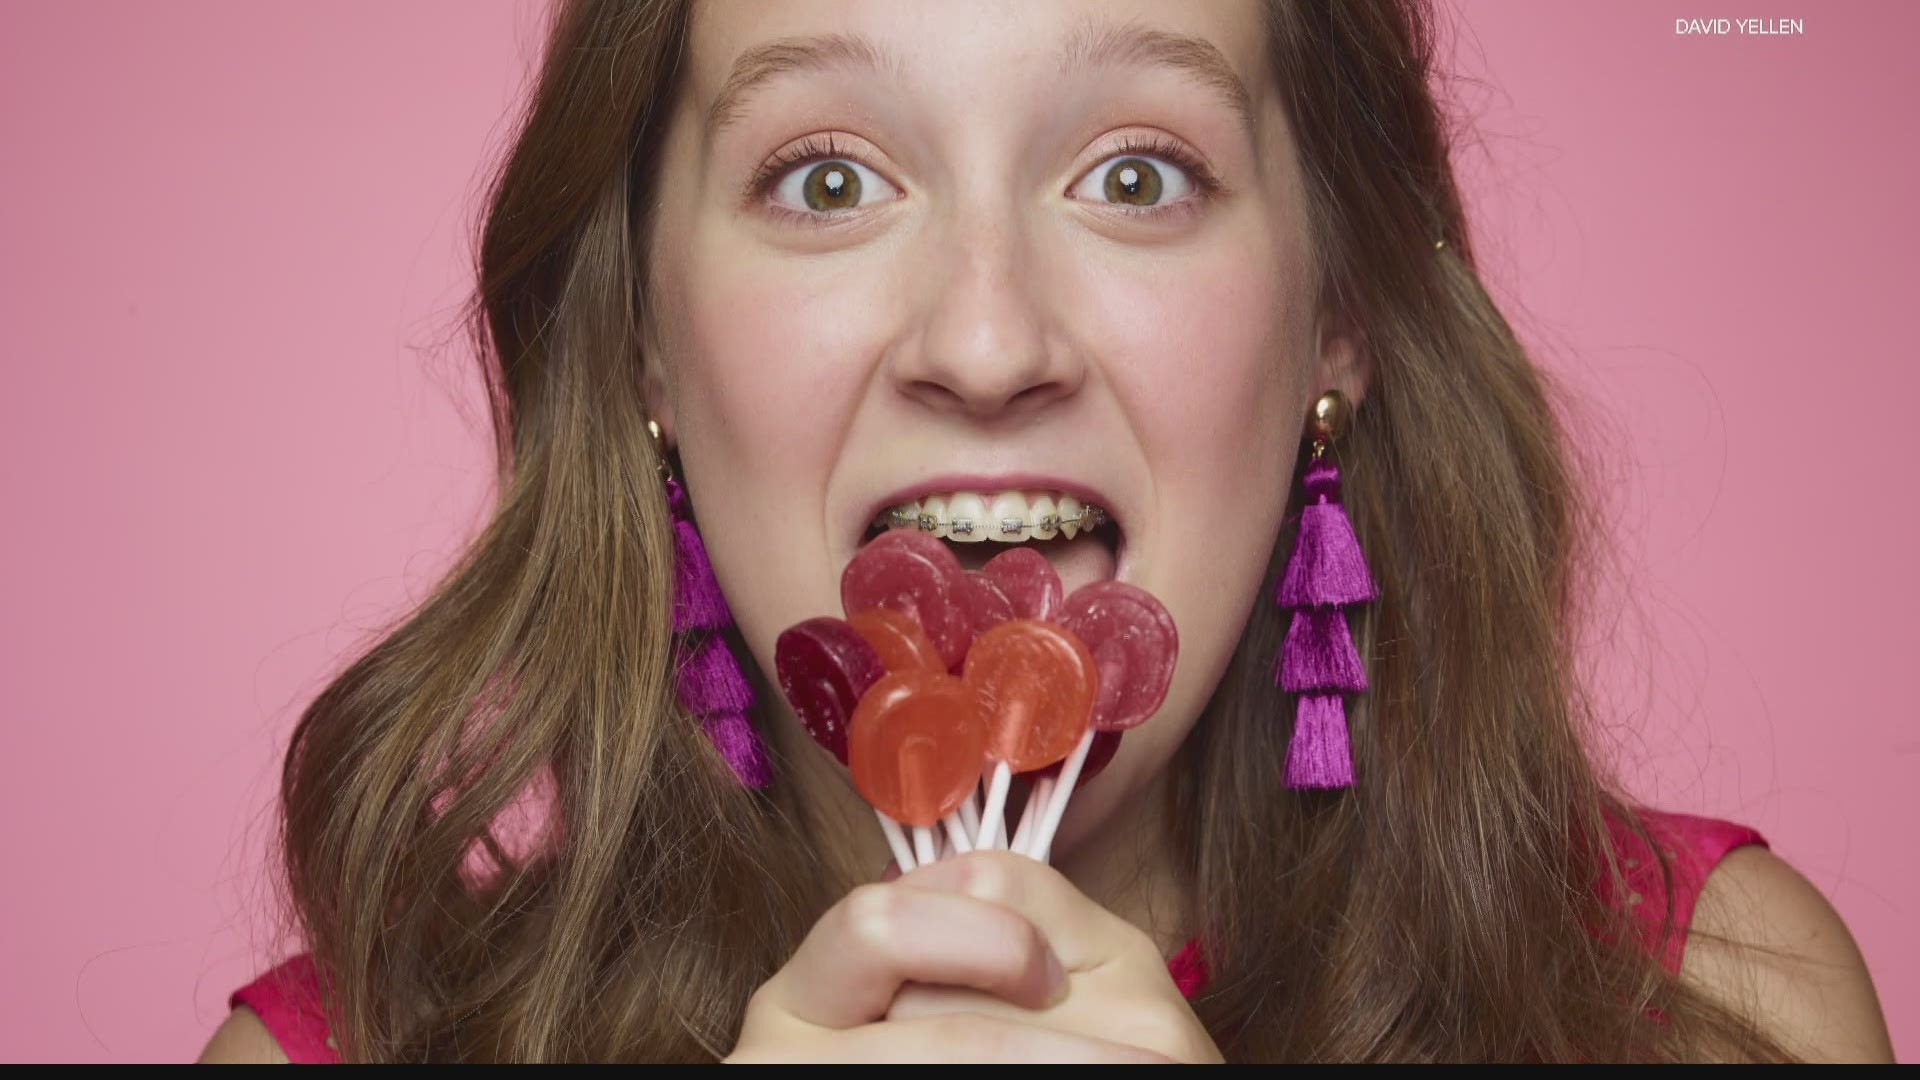 The face and brain behind the healthy candy is the 16-year-old Alina Morse.